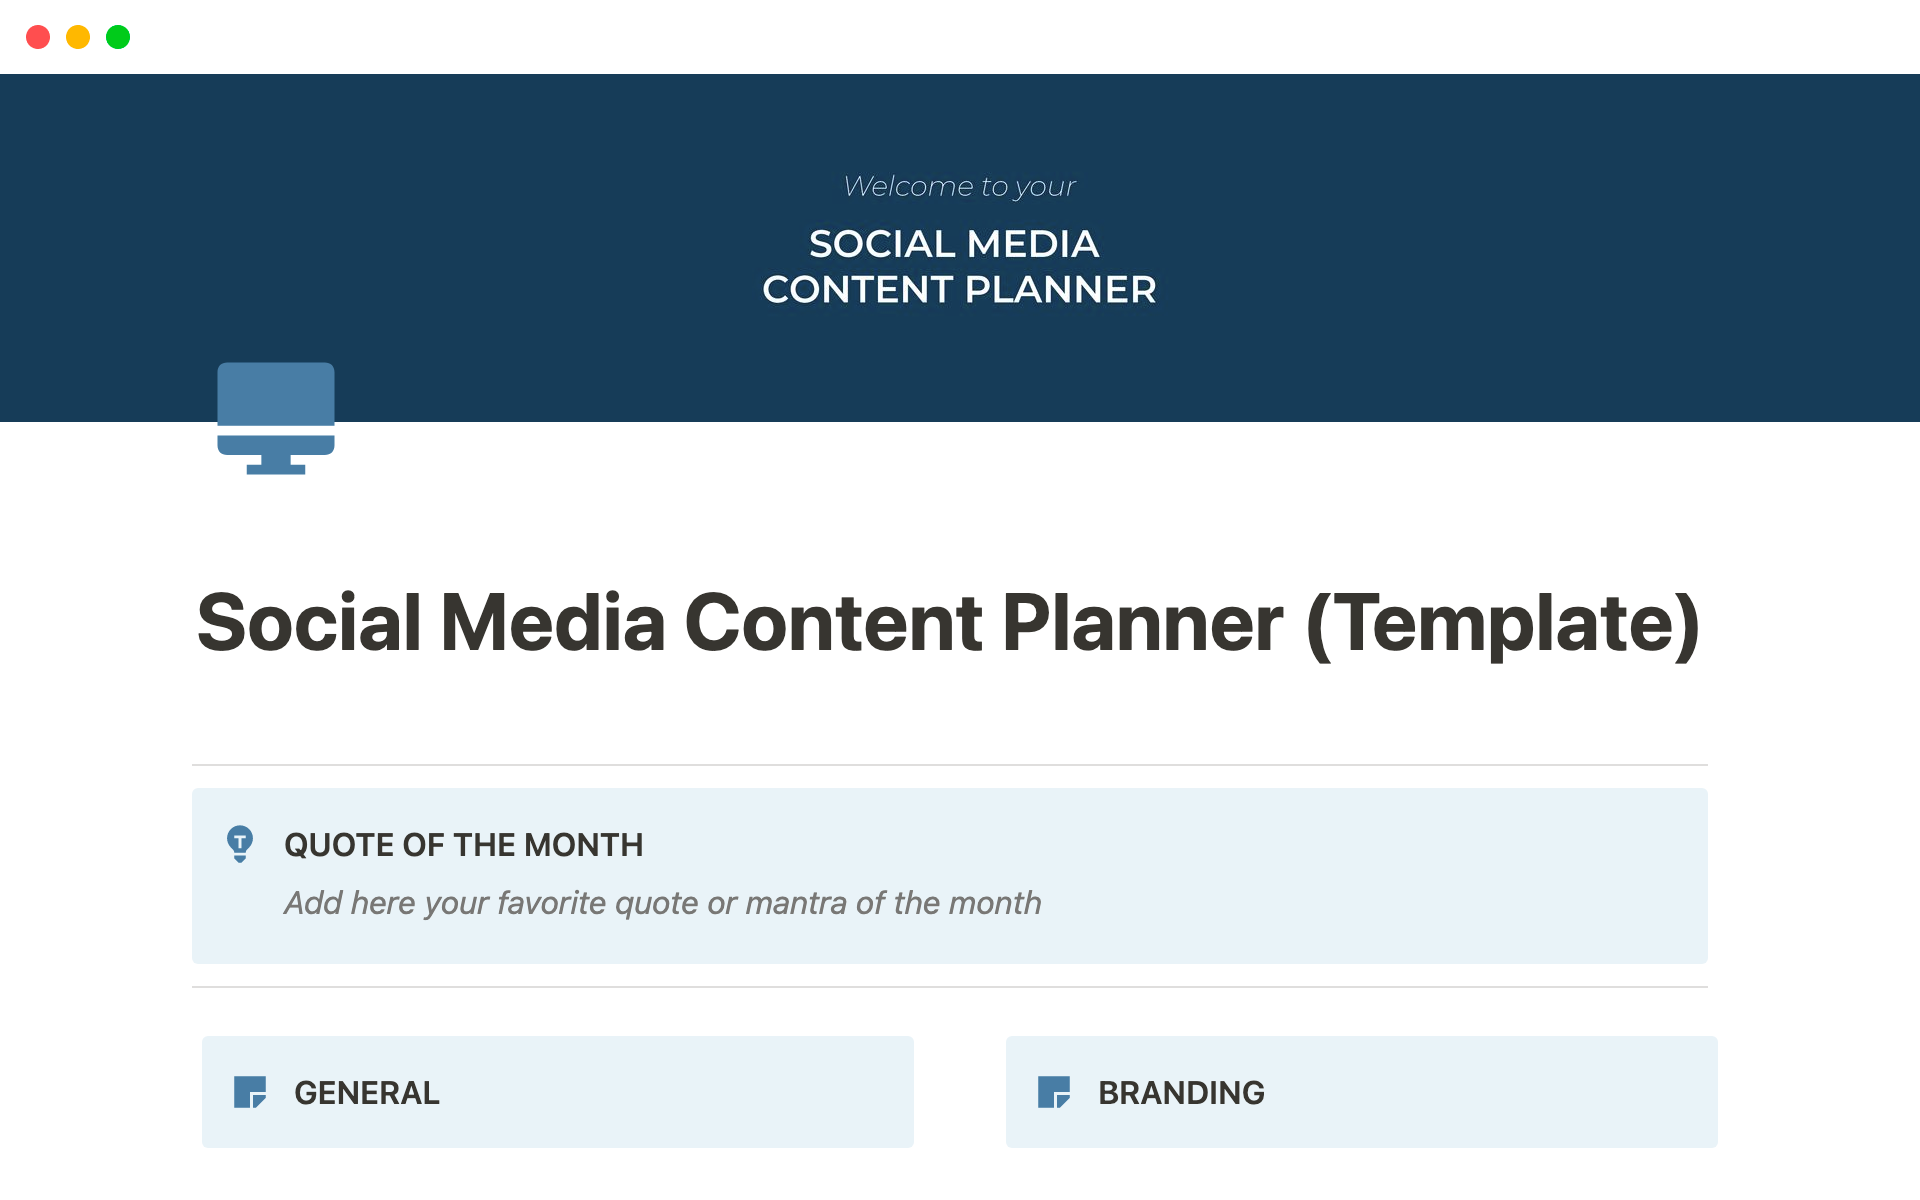 A template preview for Social Media Content Planner: Unleash your social media potential with our content planner!